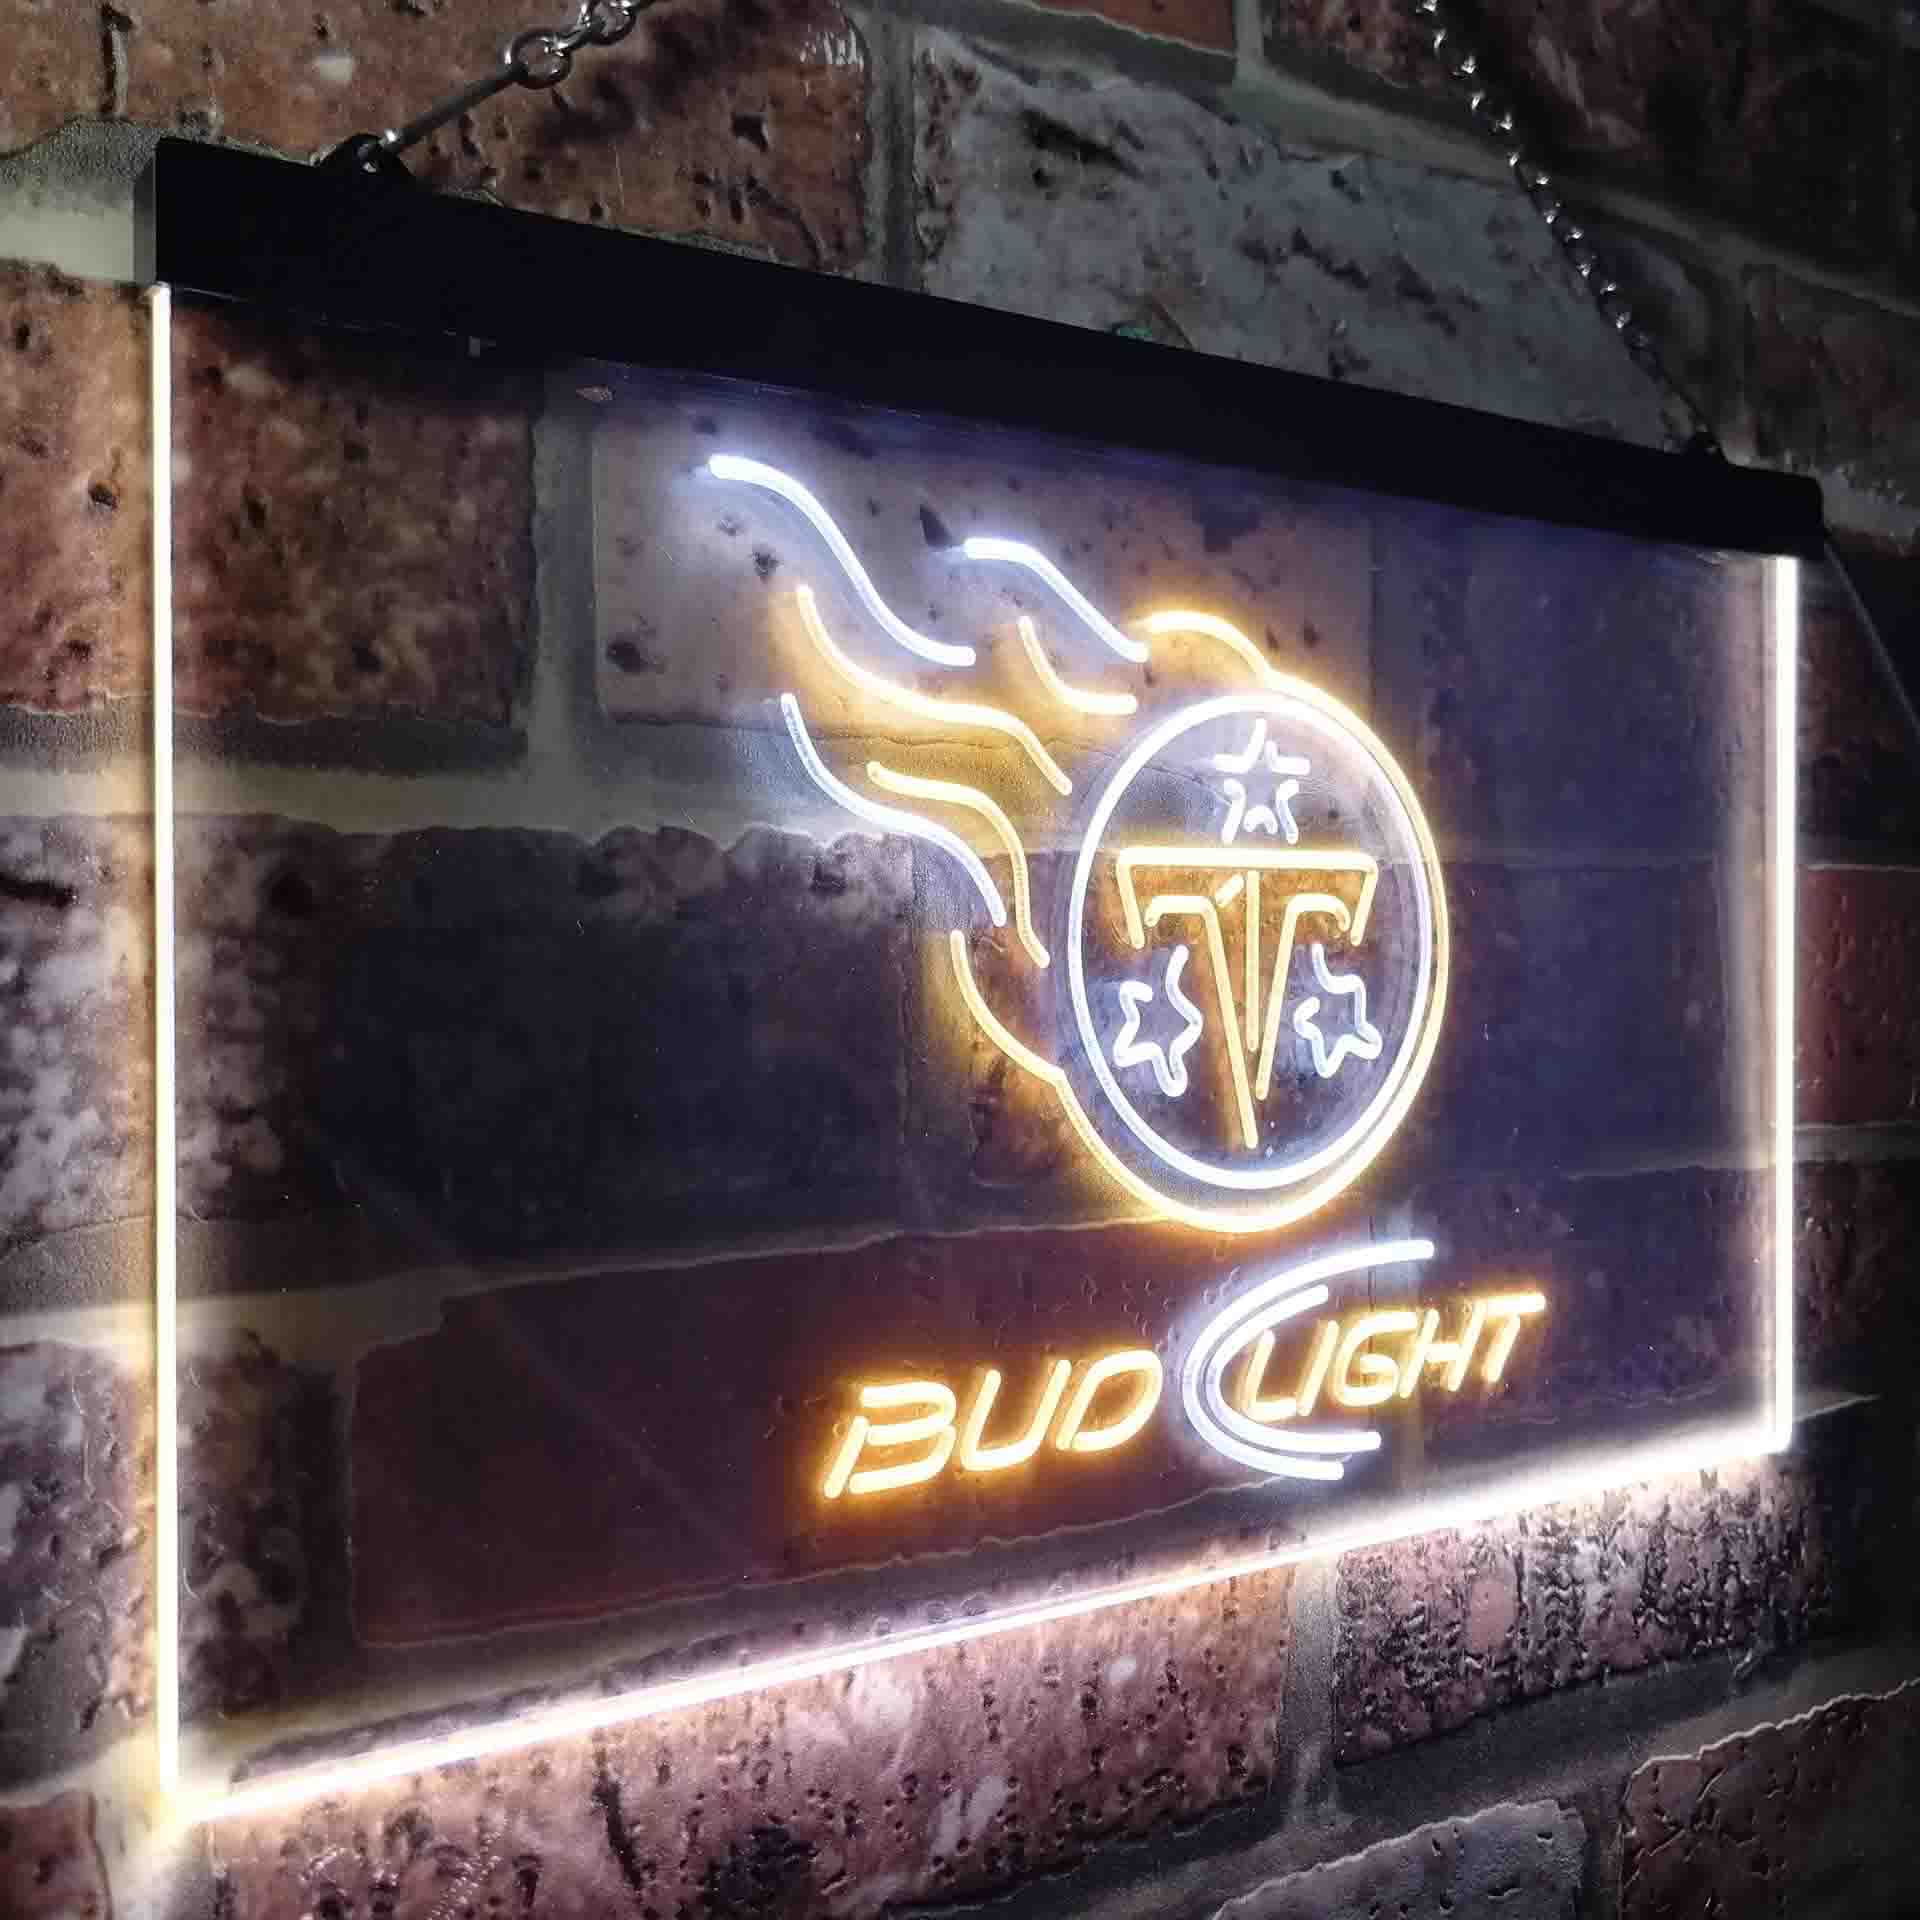 Red Tennessee Titans Bud Light LED Neon Sign